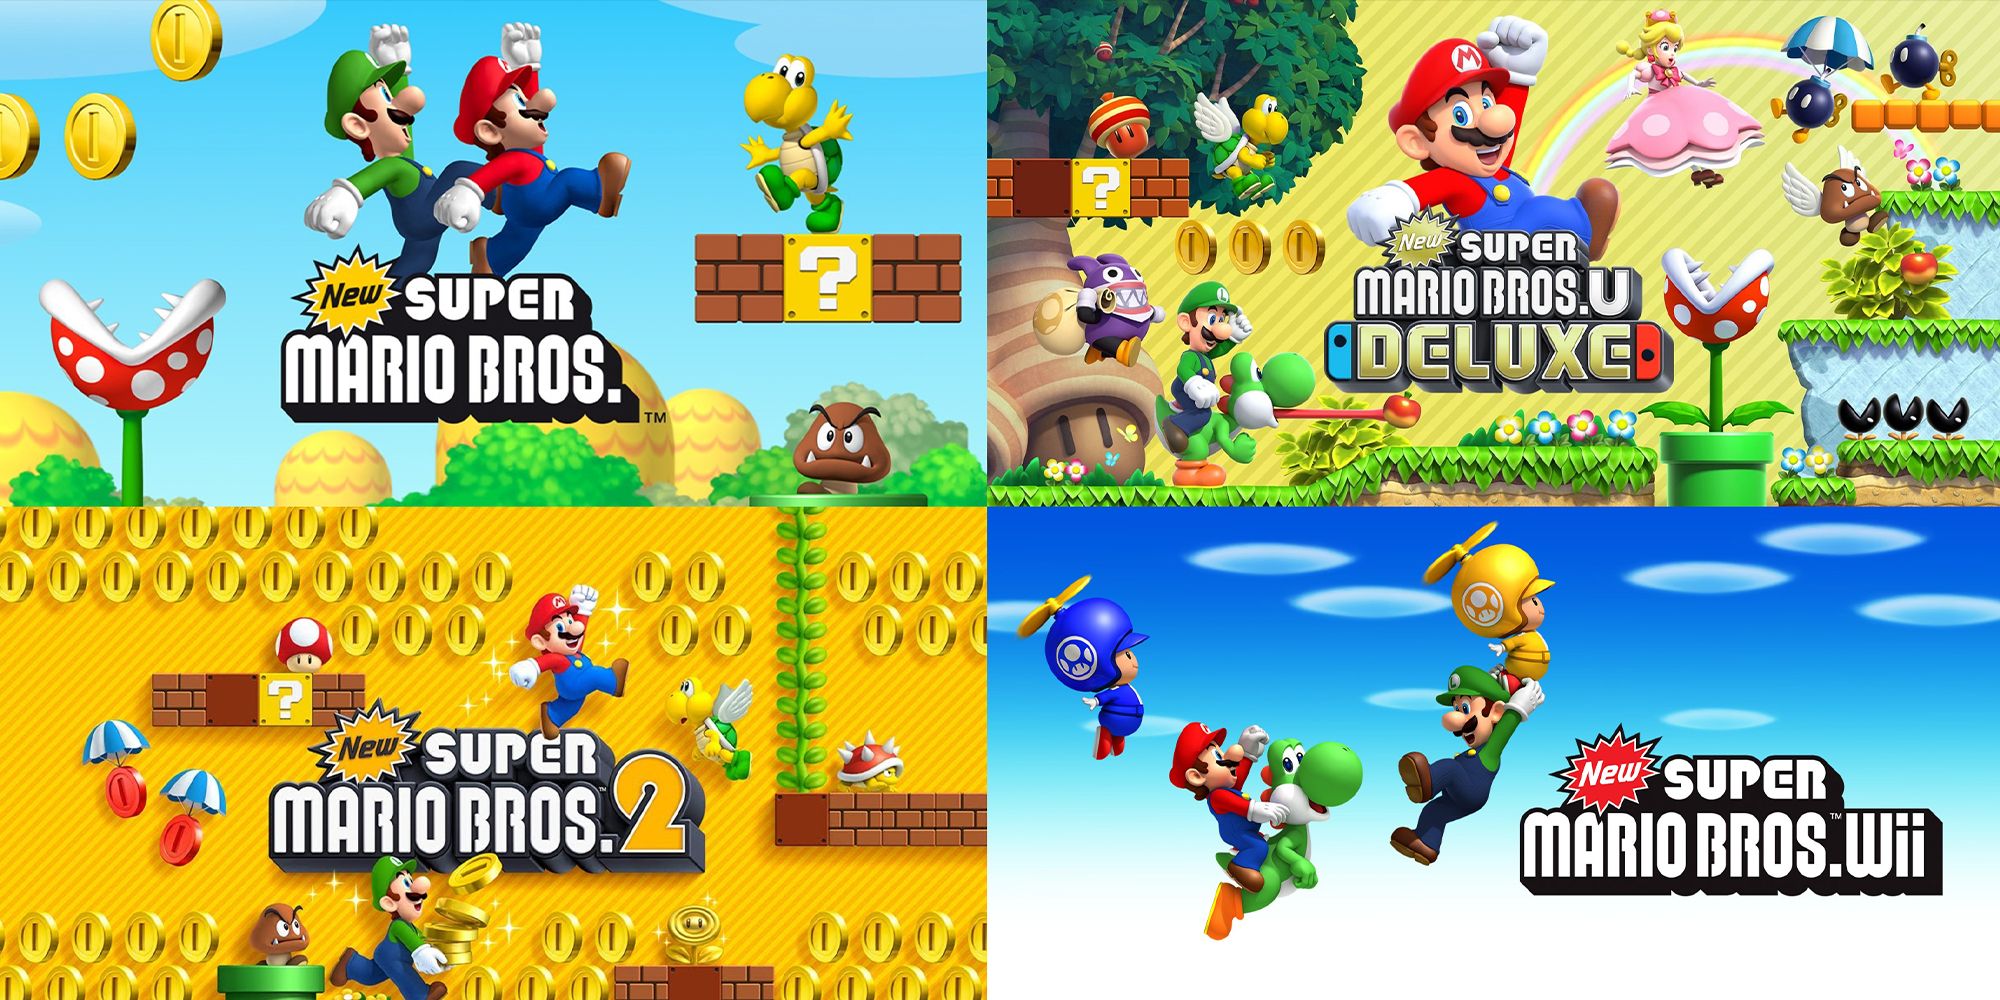 Four Images, All Covers From The New Super Mario Bros. Series